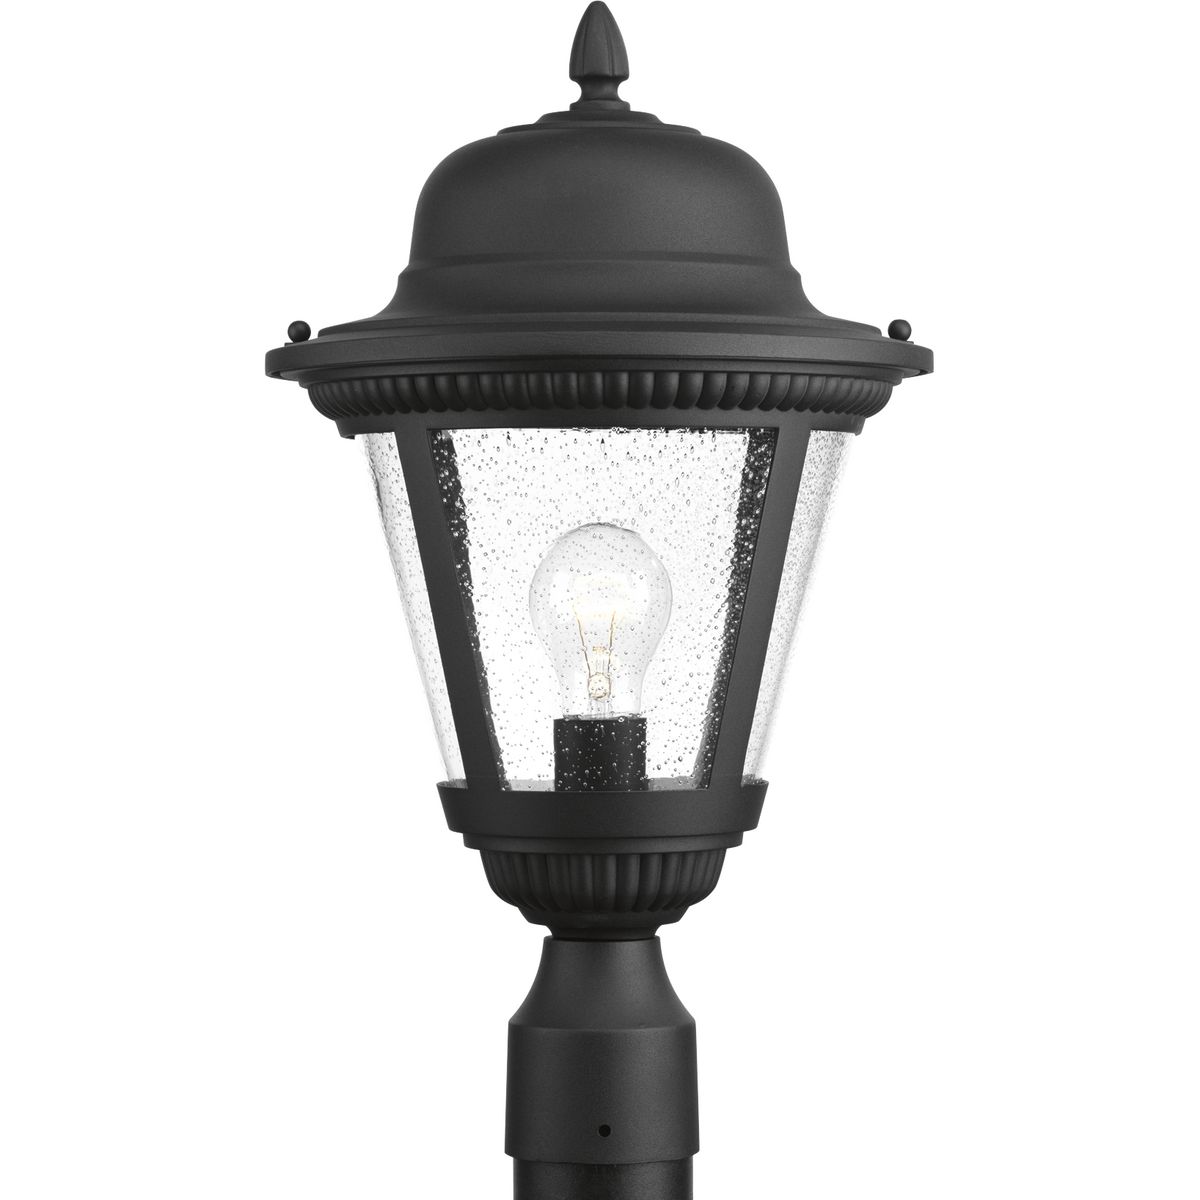 Add a touch of rustic appeal and classic styling with beaded detailing in the Westport collection. Clear seeded glass compliments the durable powder coat finish in die-cast aluminum frames. One-light 11 in post lantern. Black finish.